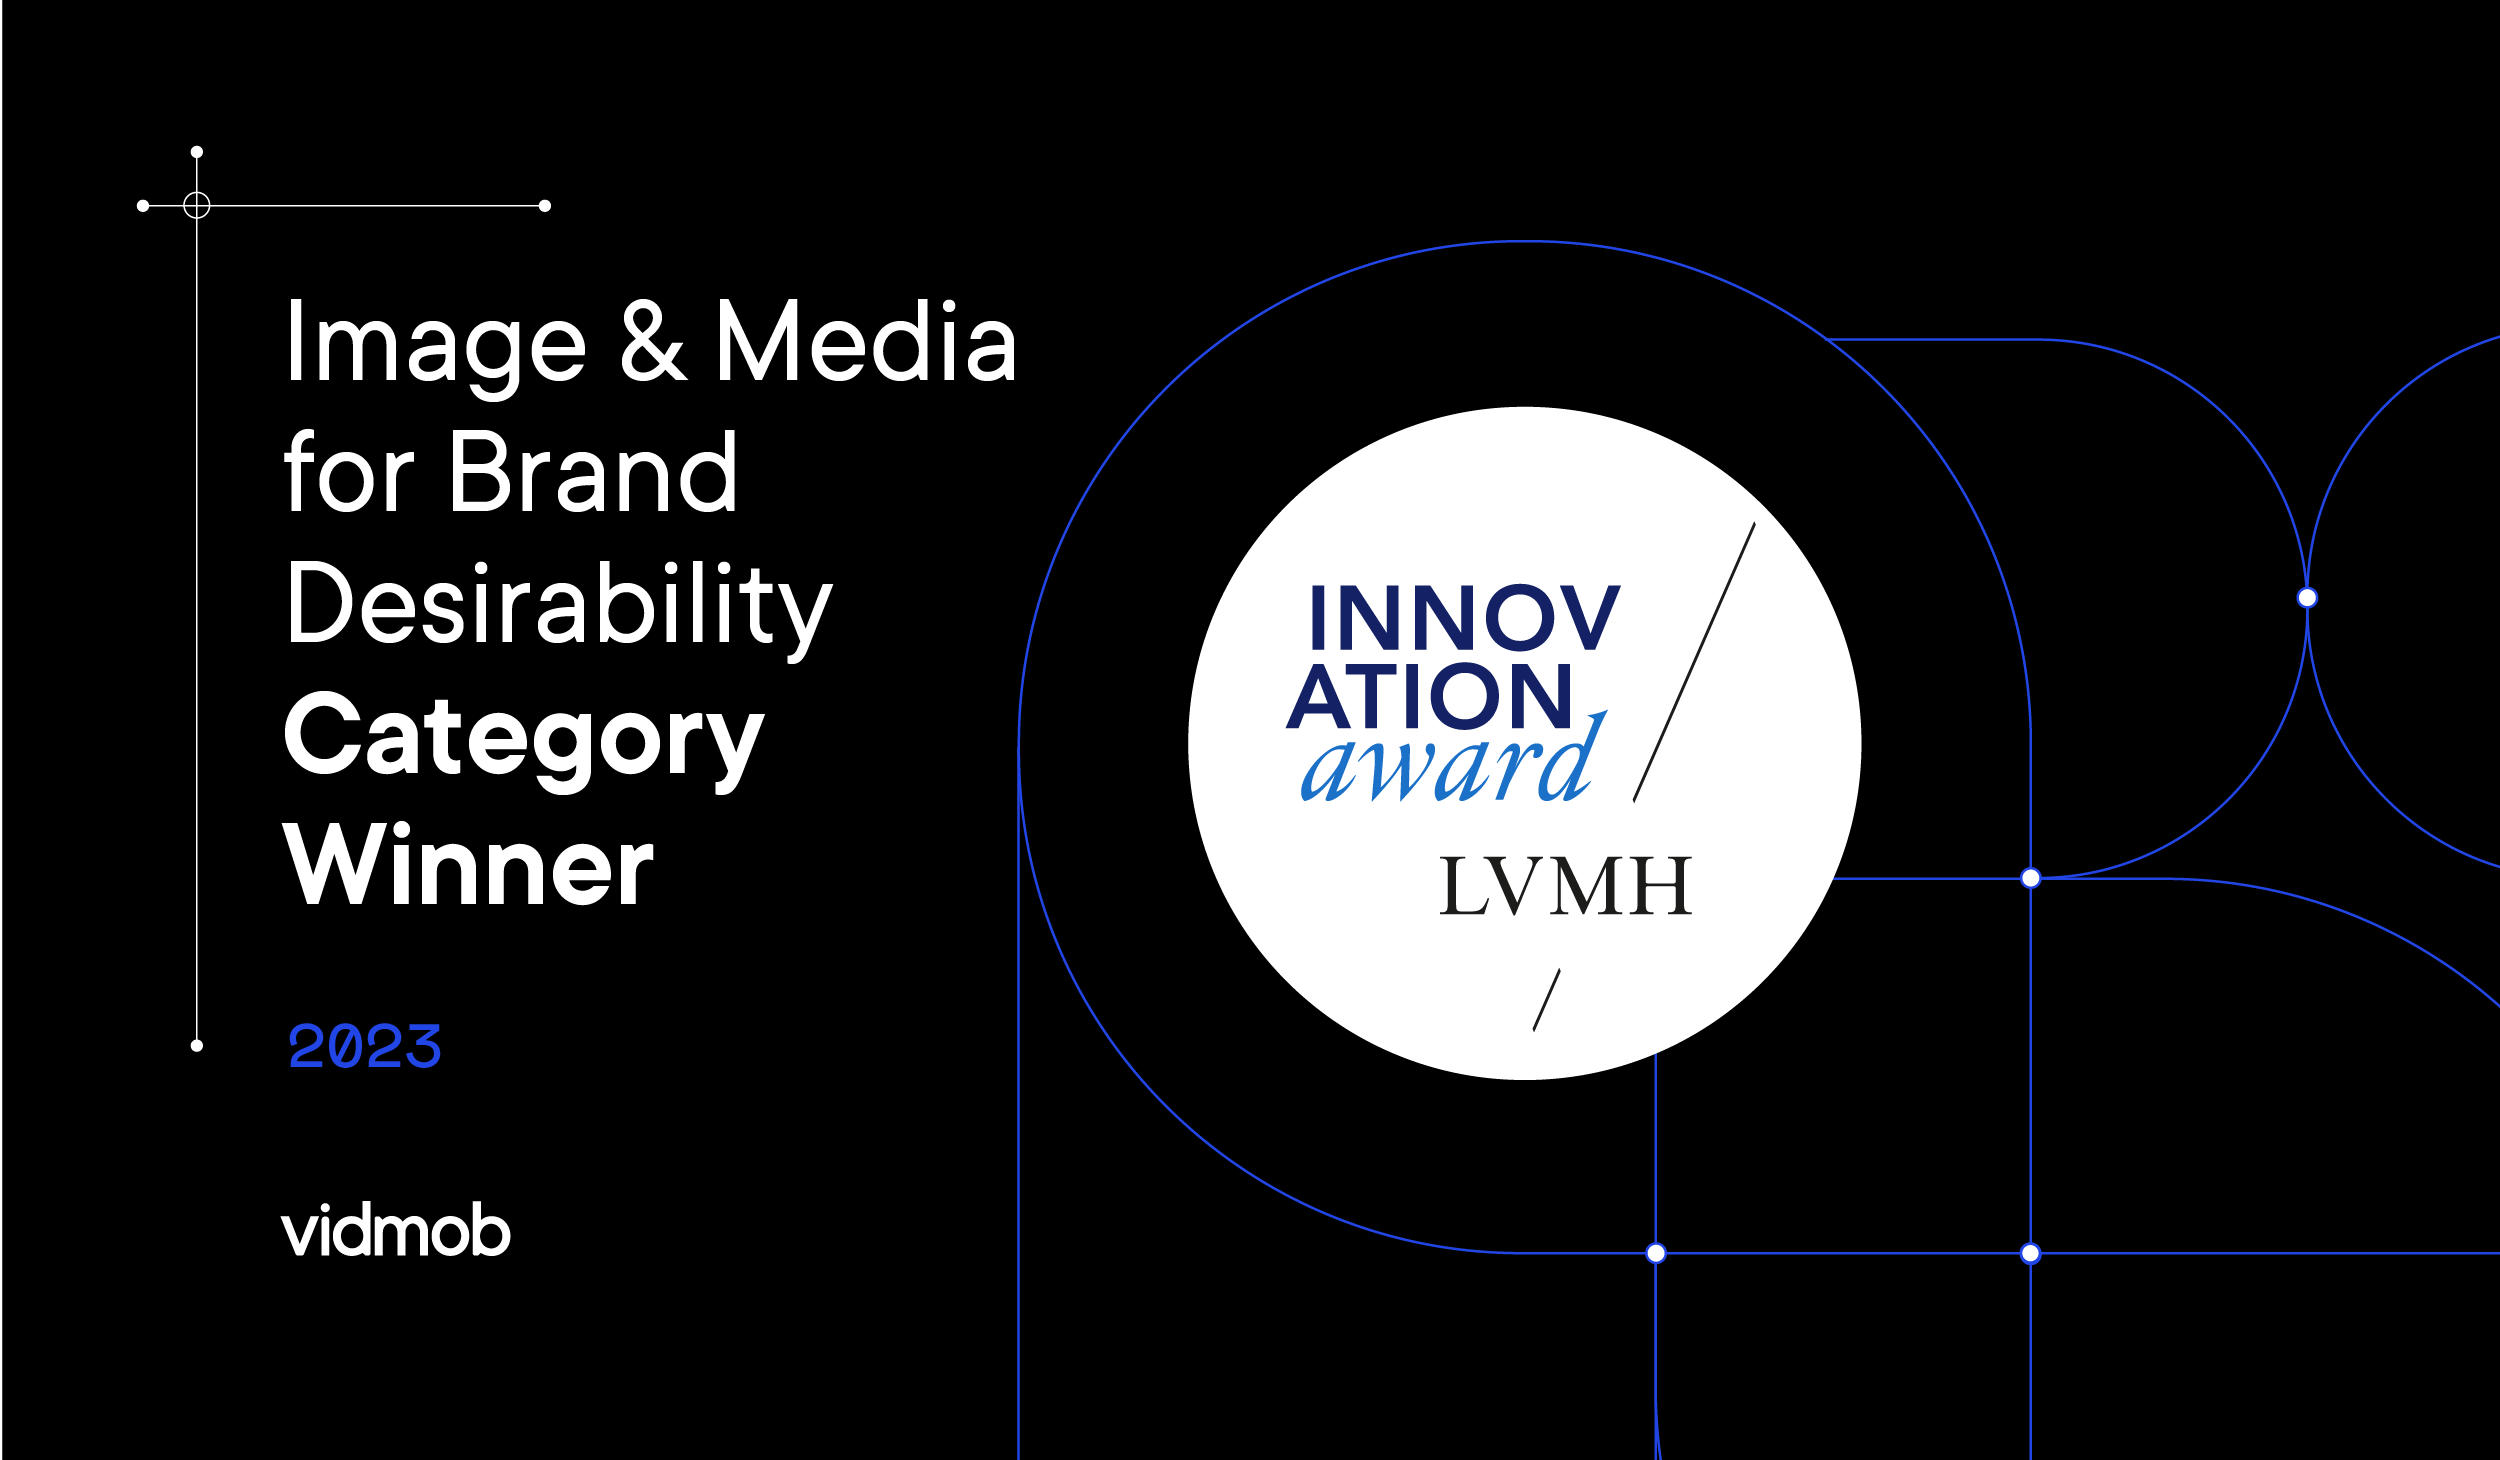 Finalist for an LVMH Innovation Award in the Media and Brand